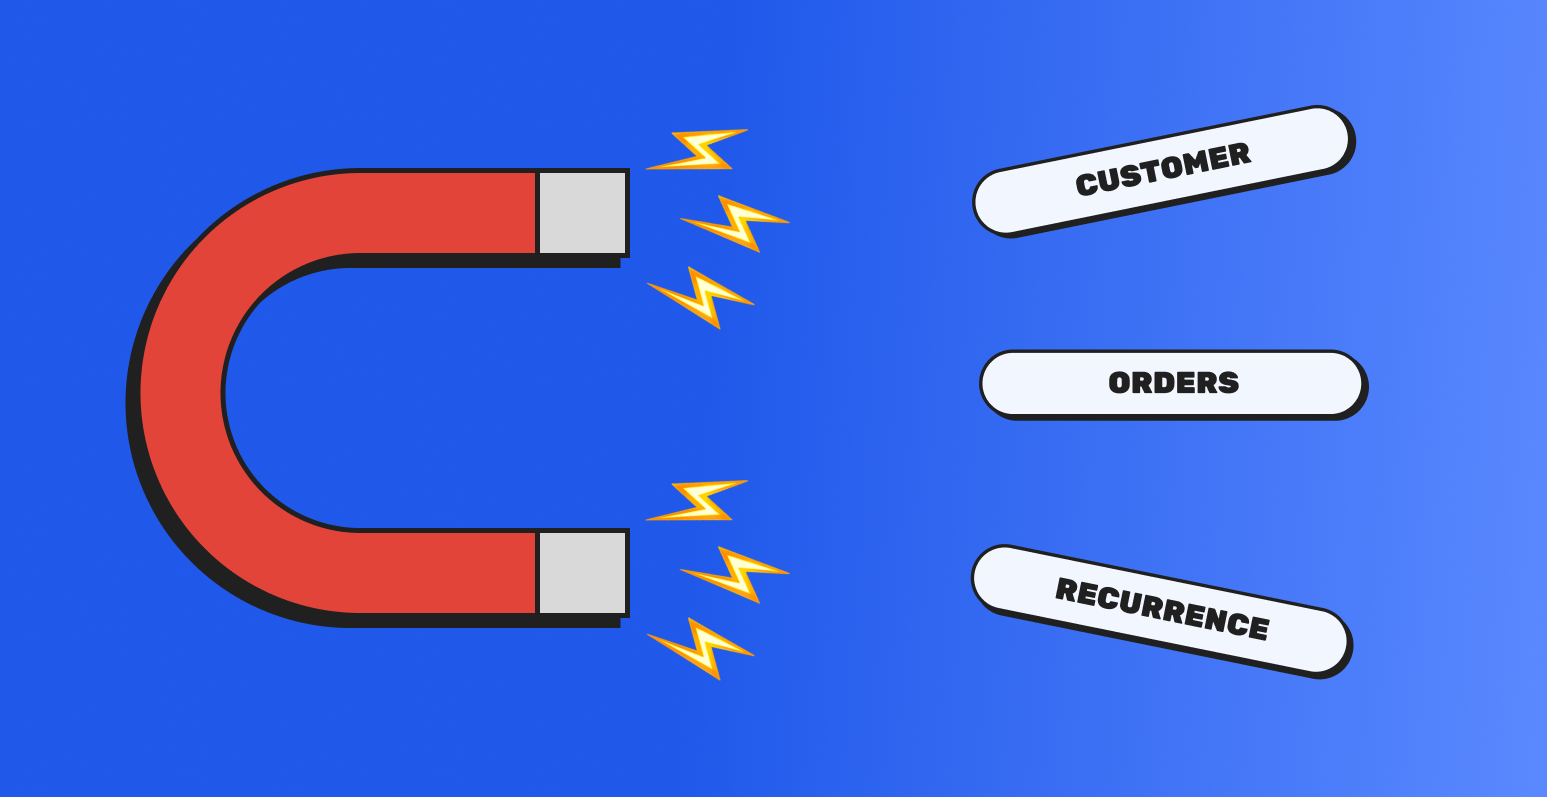 This image features a visual representation of a giant magnet pulling three topics: 'Customer', 'Orders', and 'Recurrence' towards it.